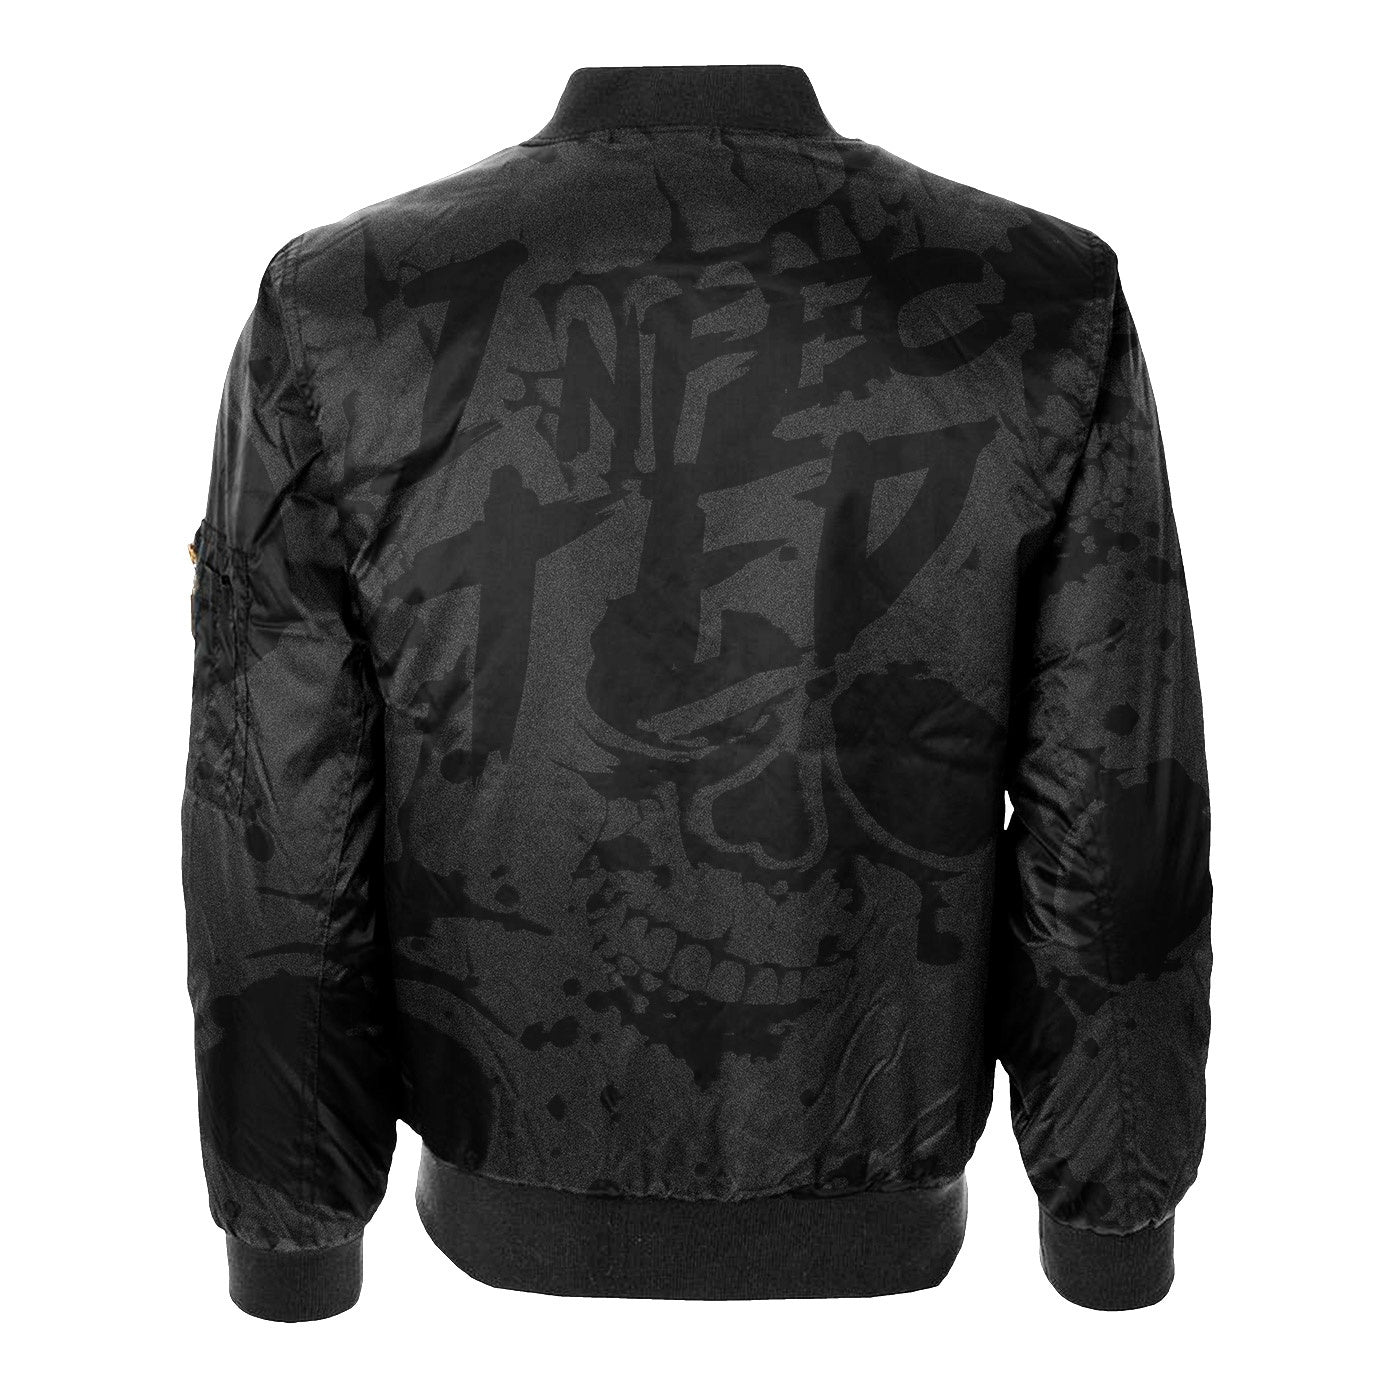 Infected Bomber Jacket